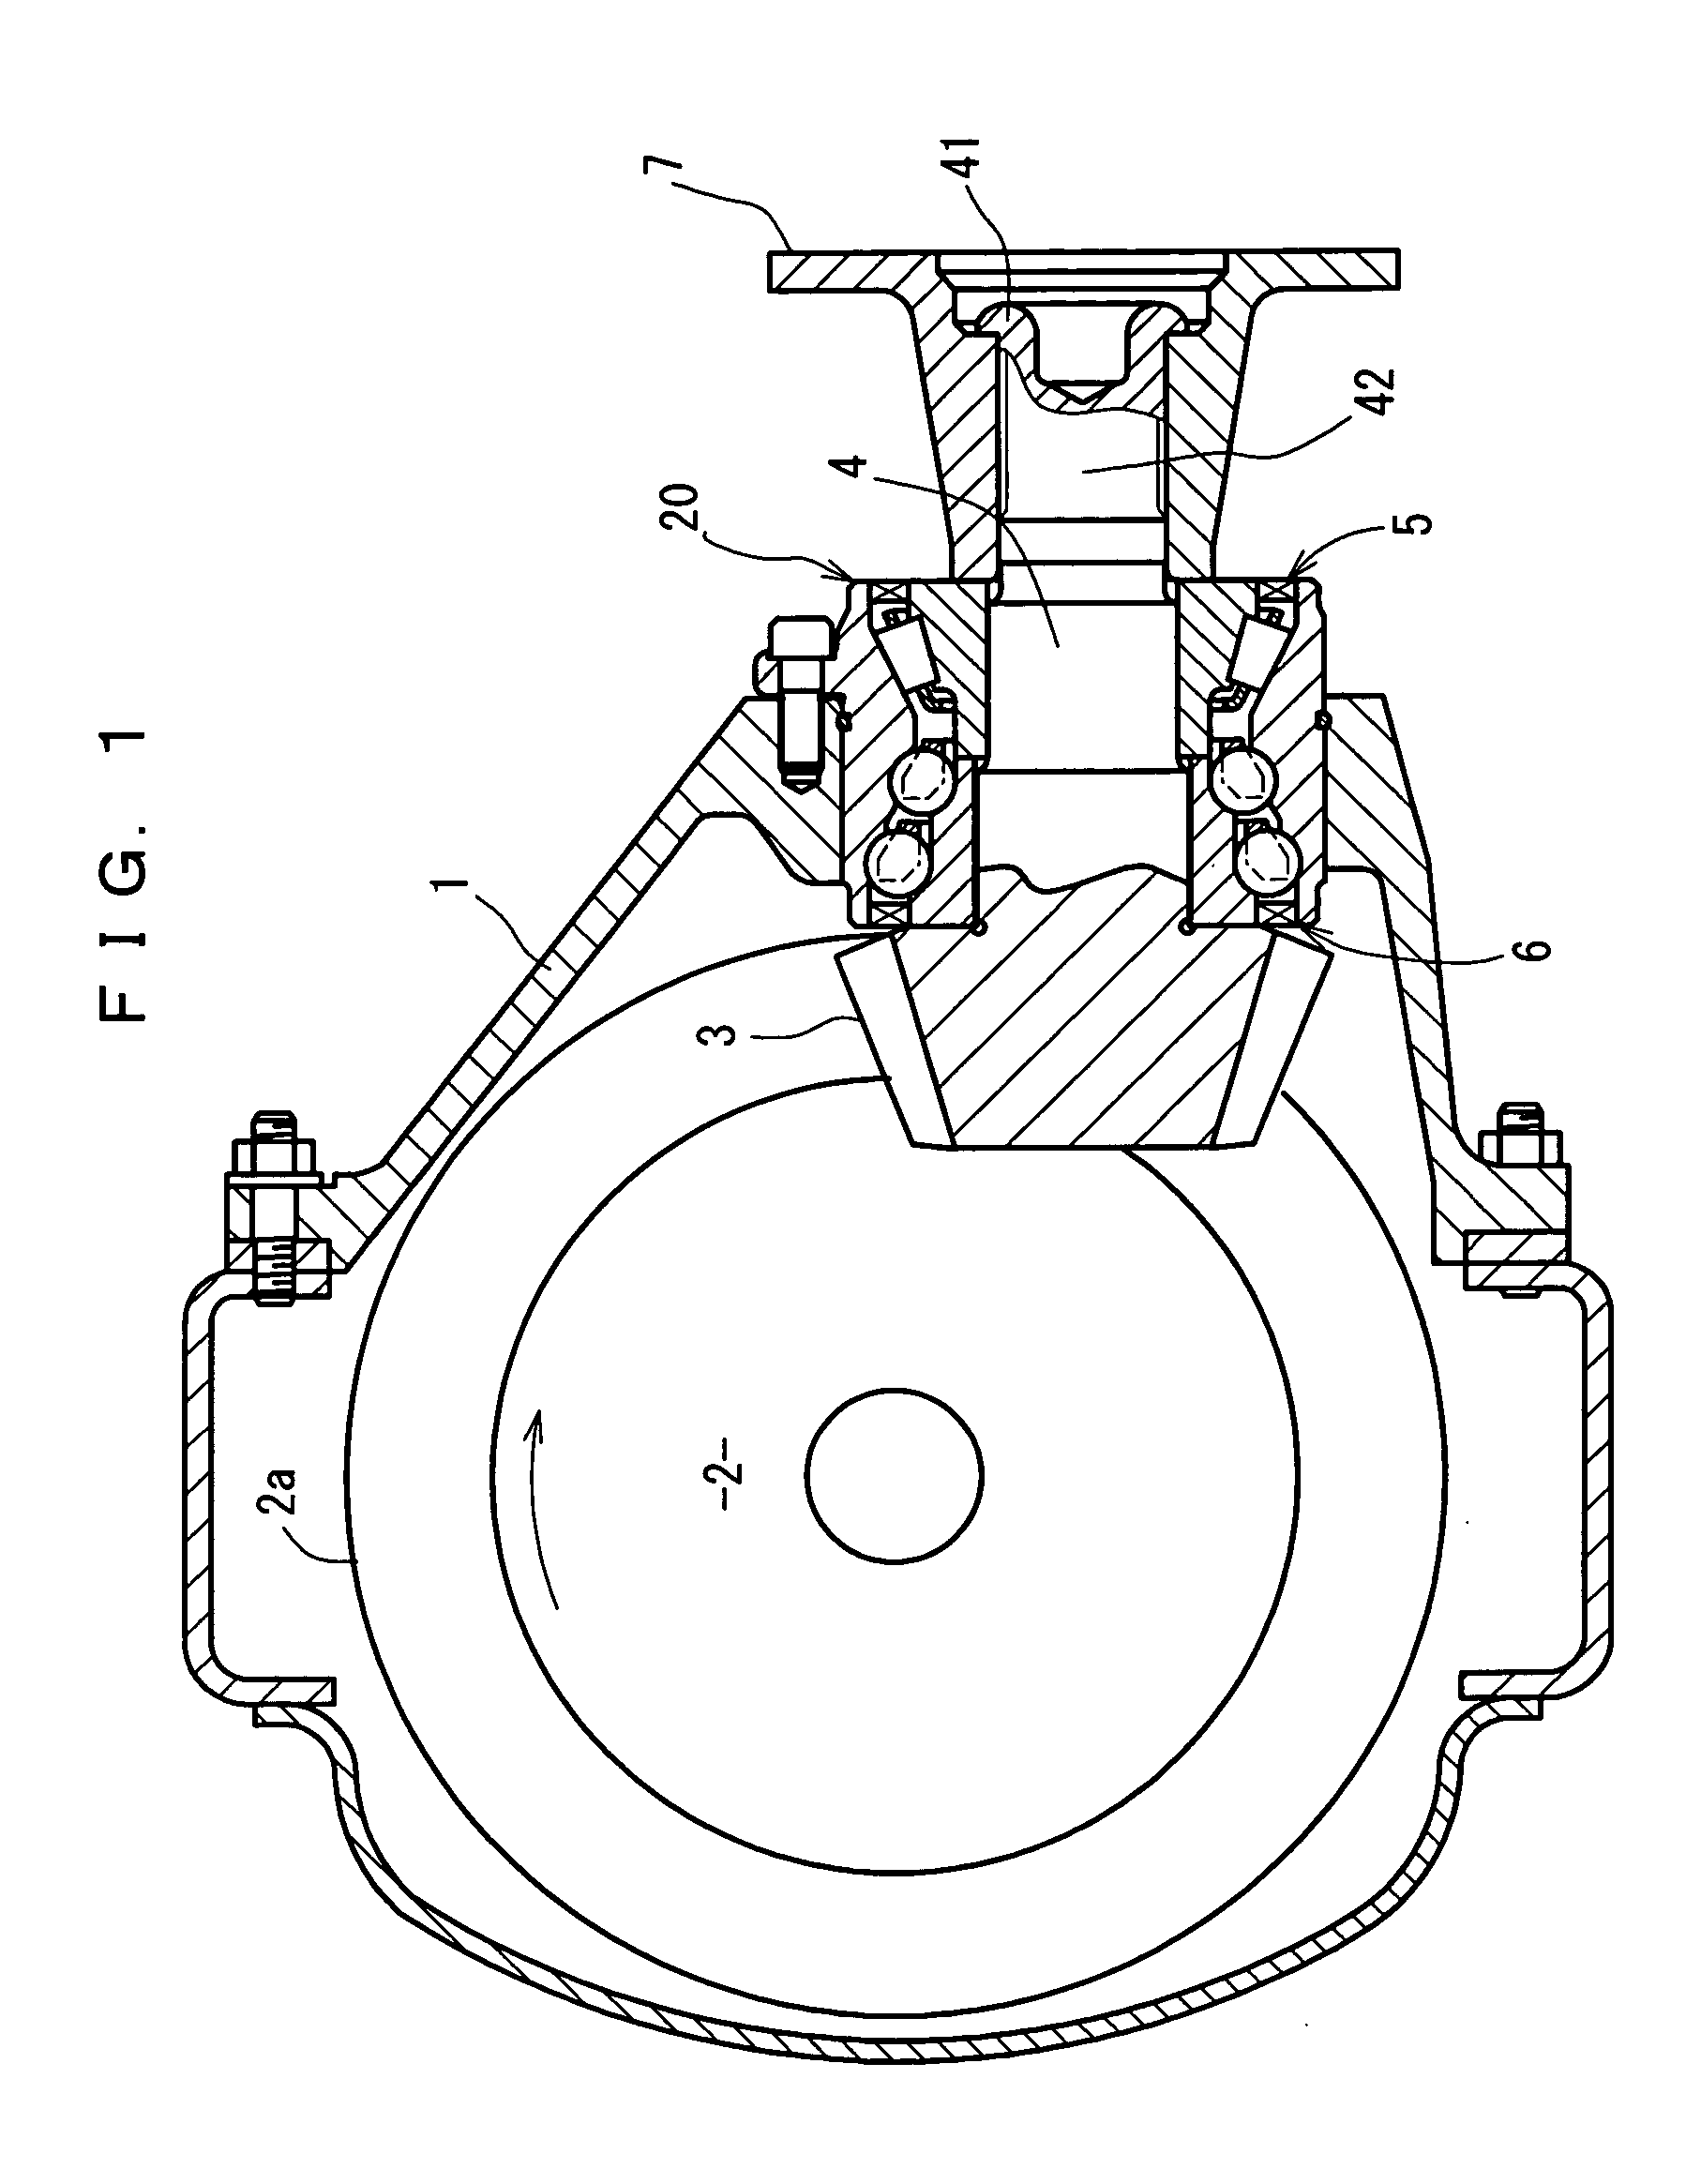 Bearing device for supporting pinion shaft